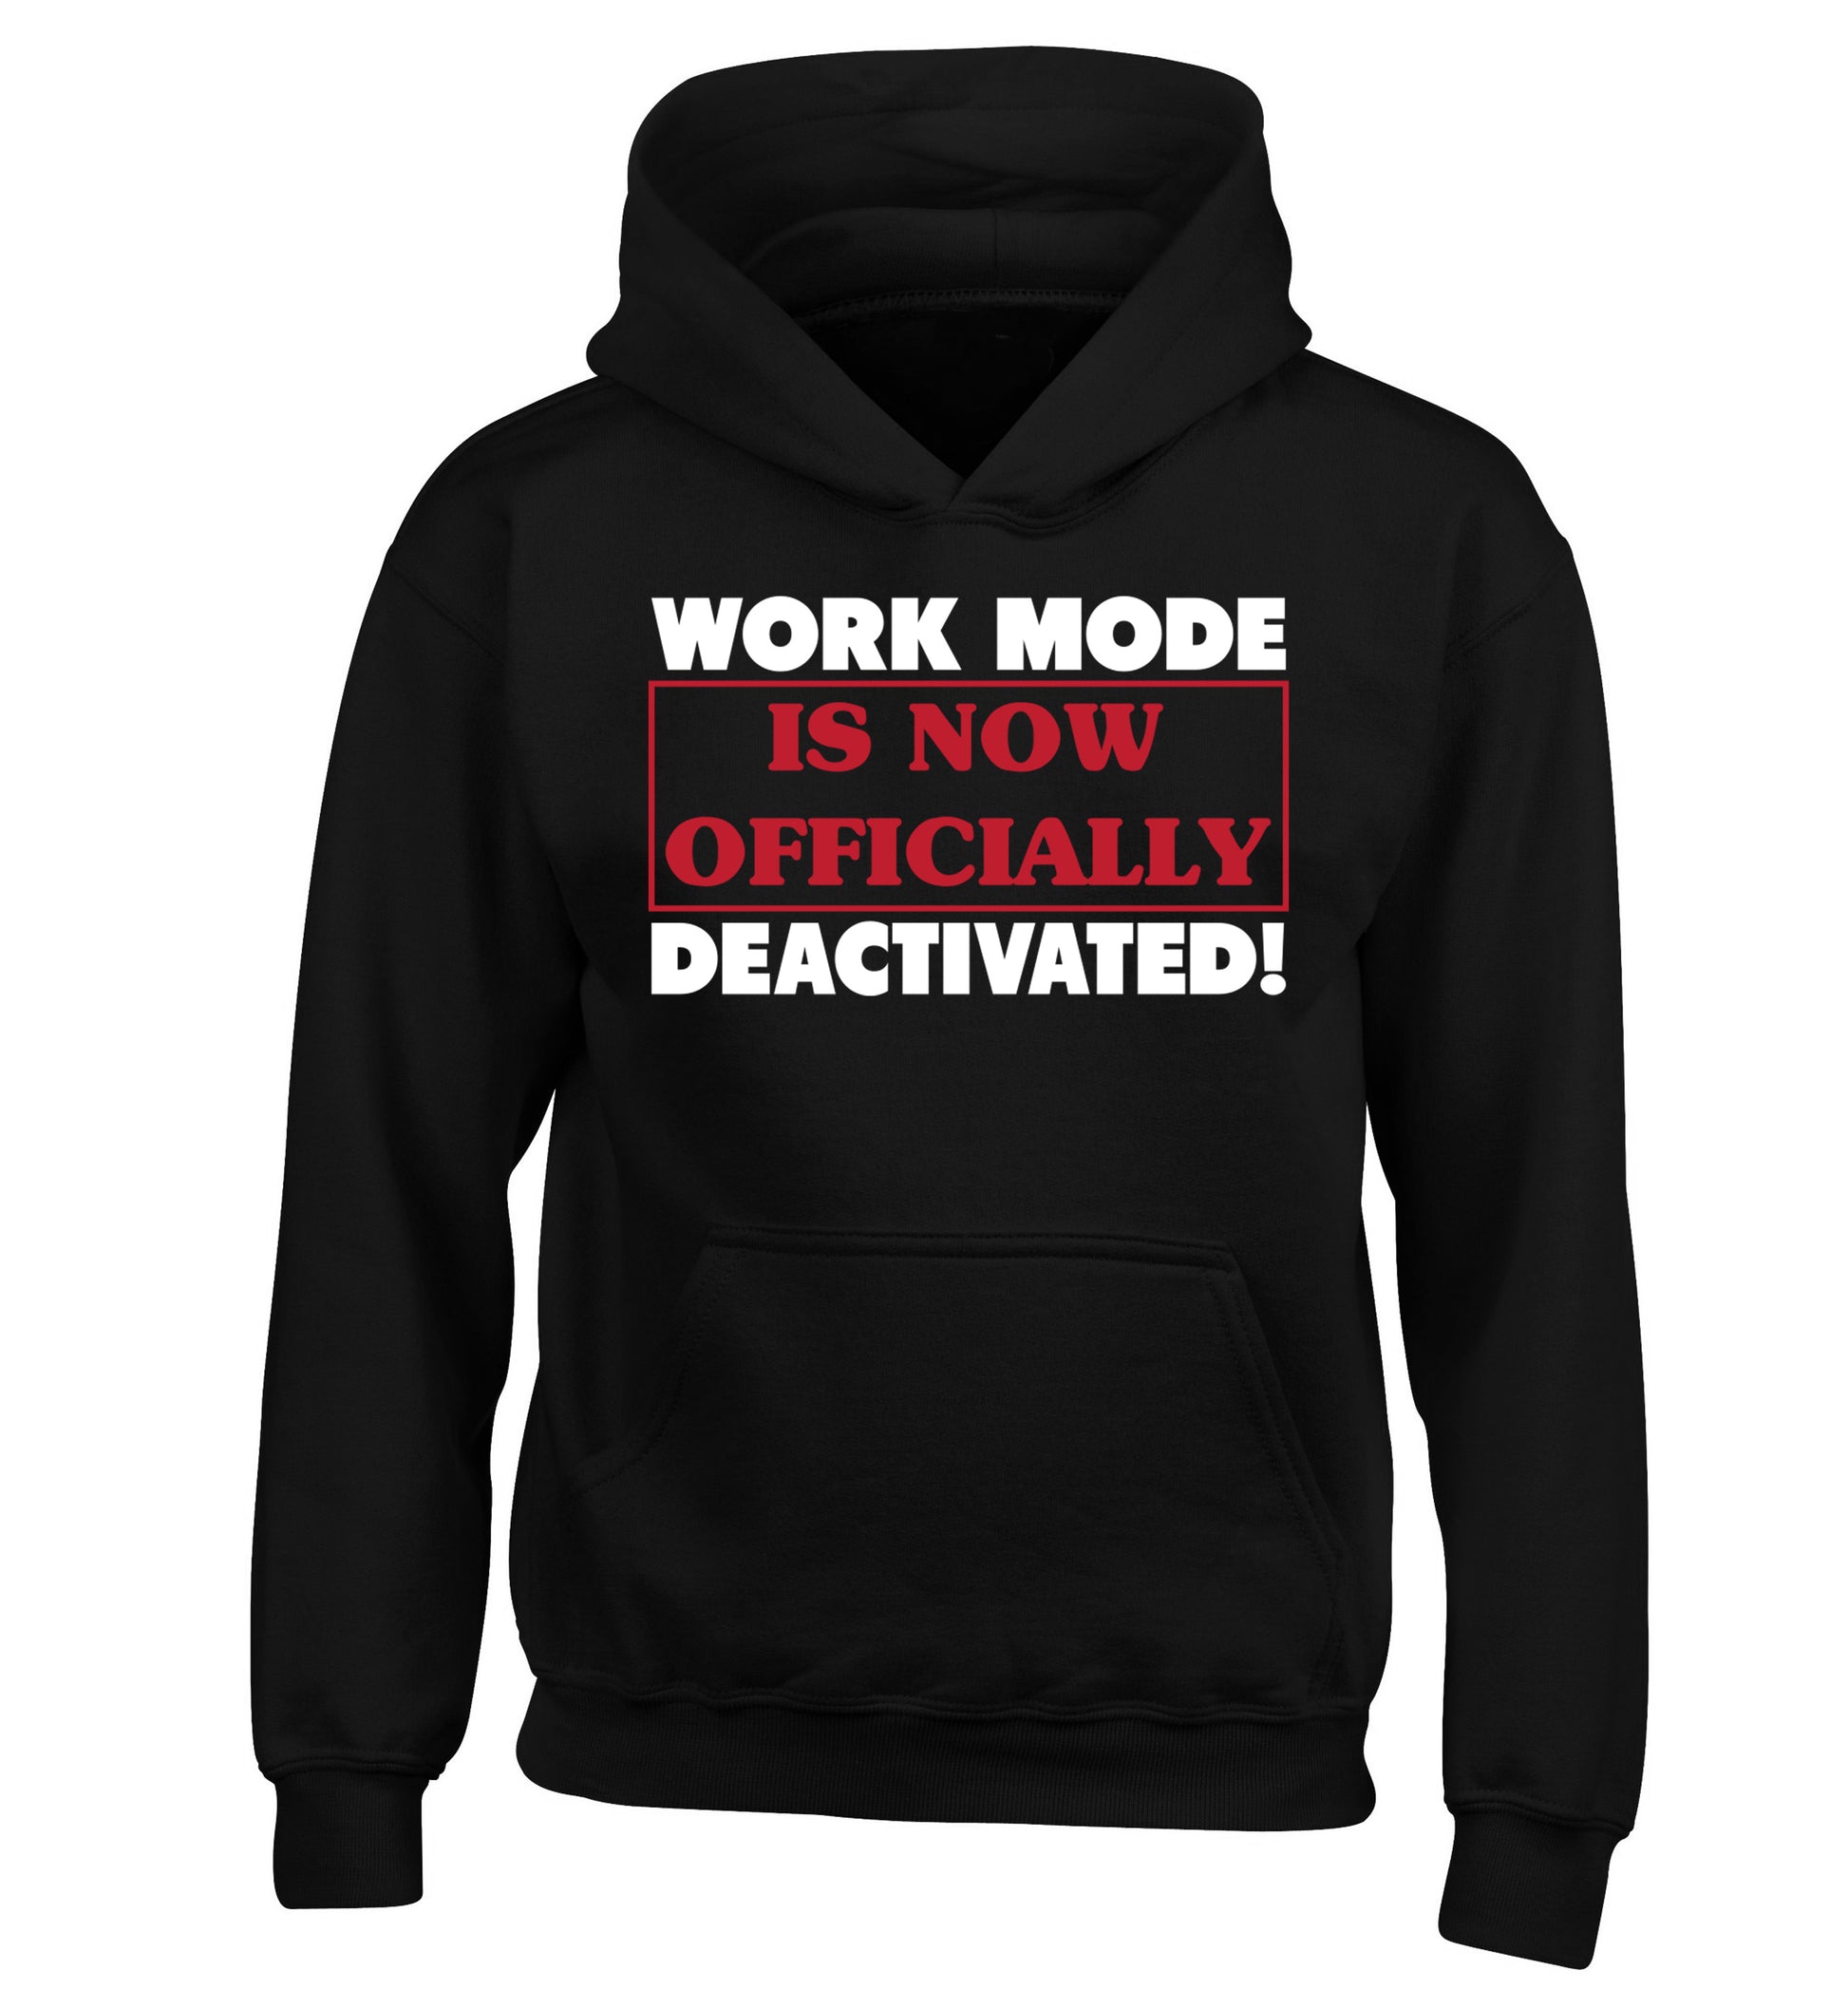 Work mode is now officially deactivated children's black hoodie 12-13 Years